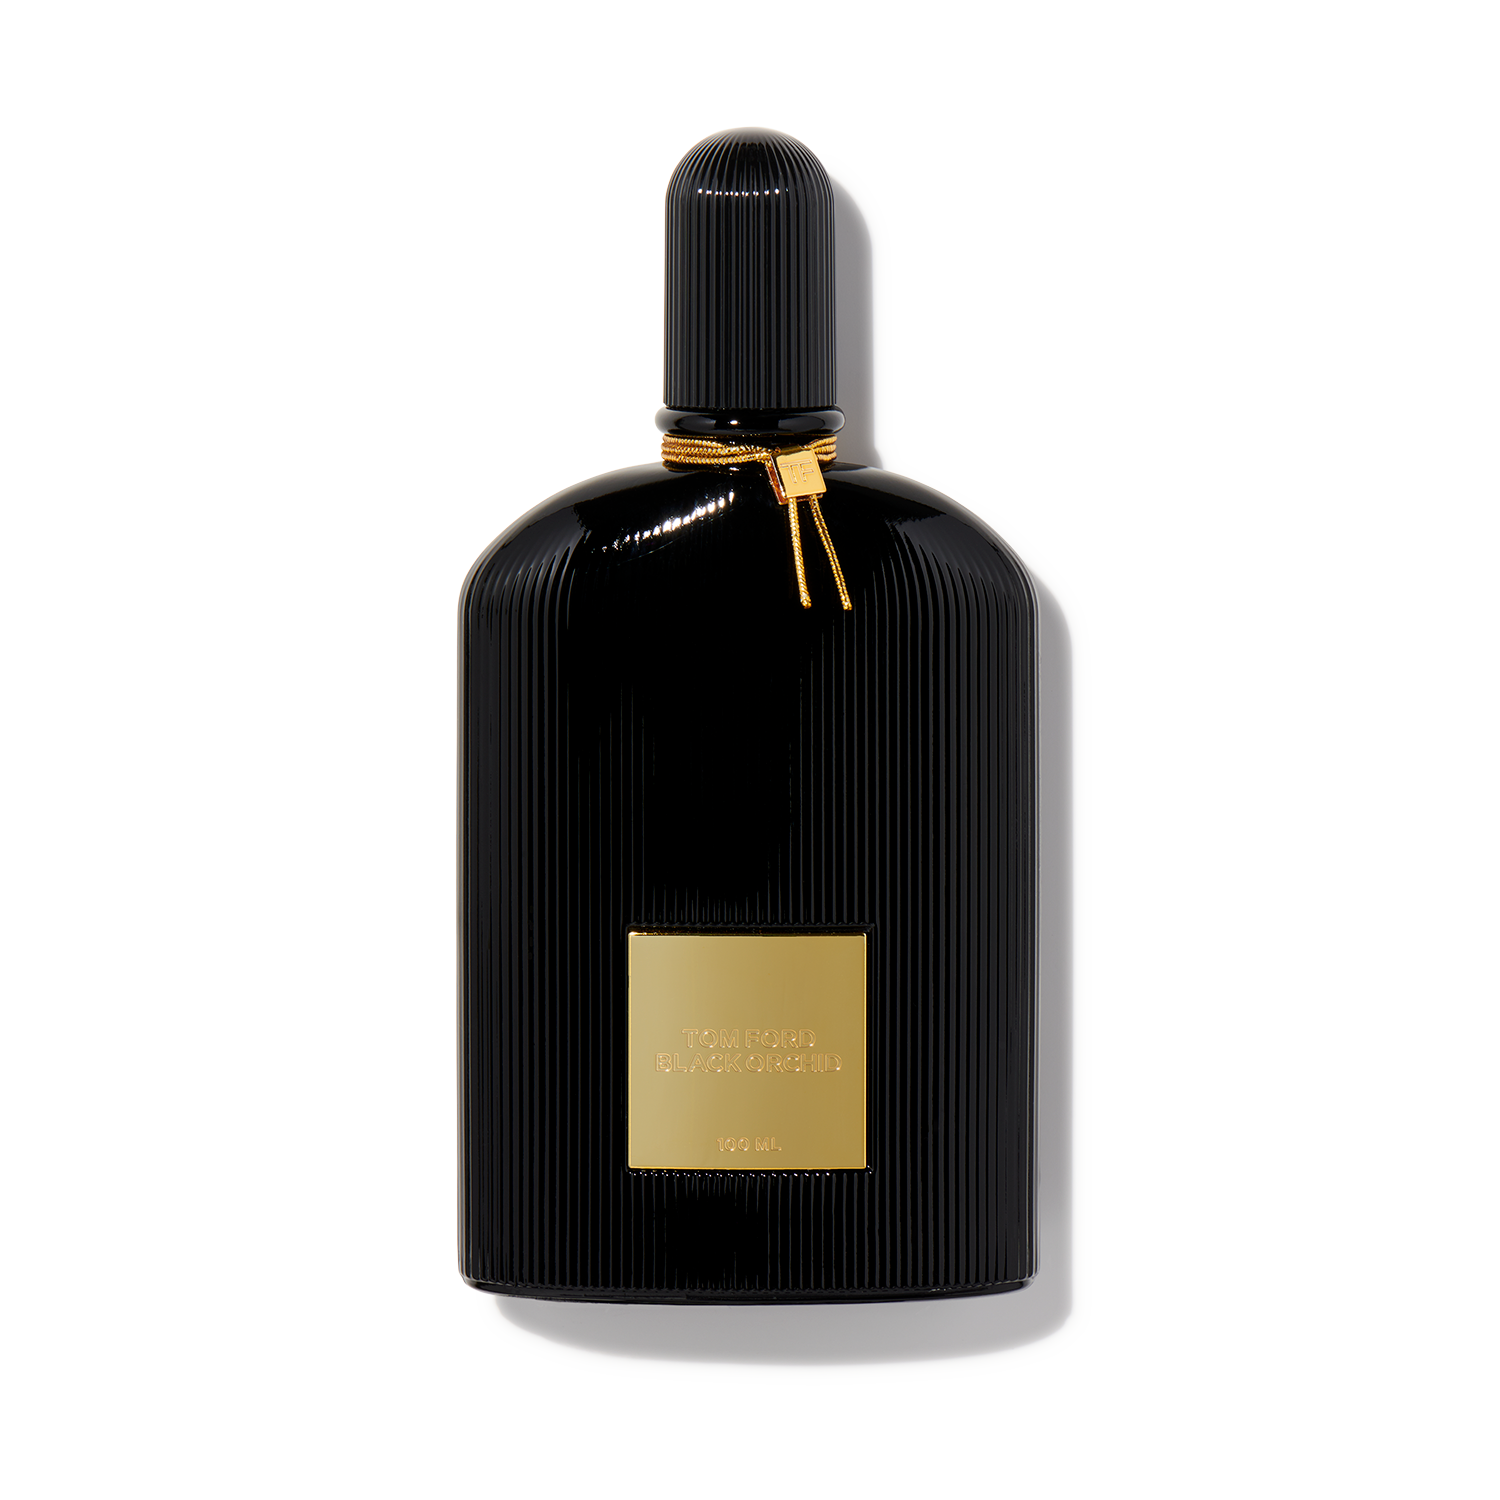 Score Black Orchid Tom Ford at Scentbird for $16.95